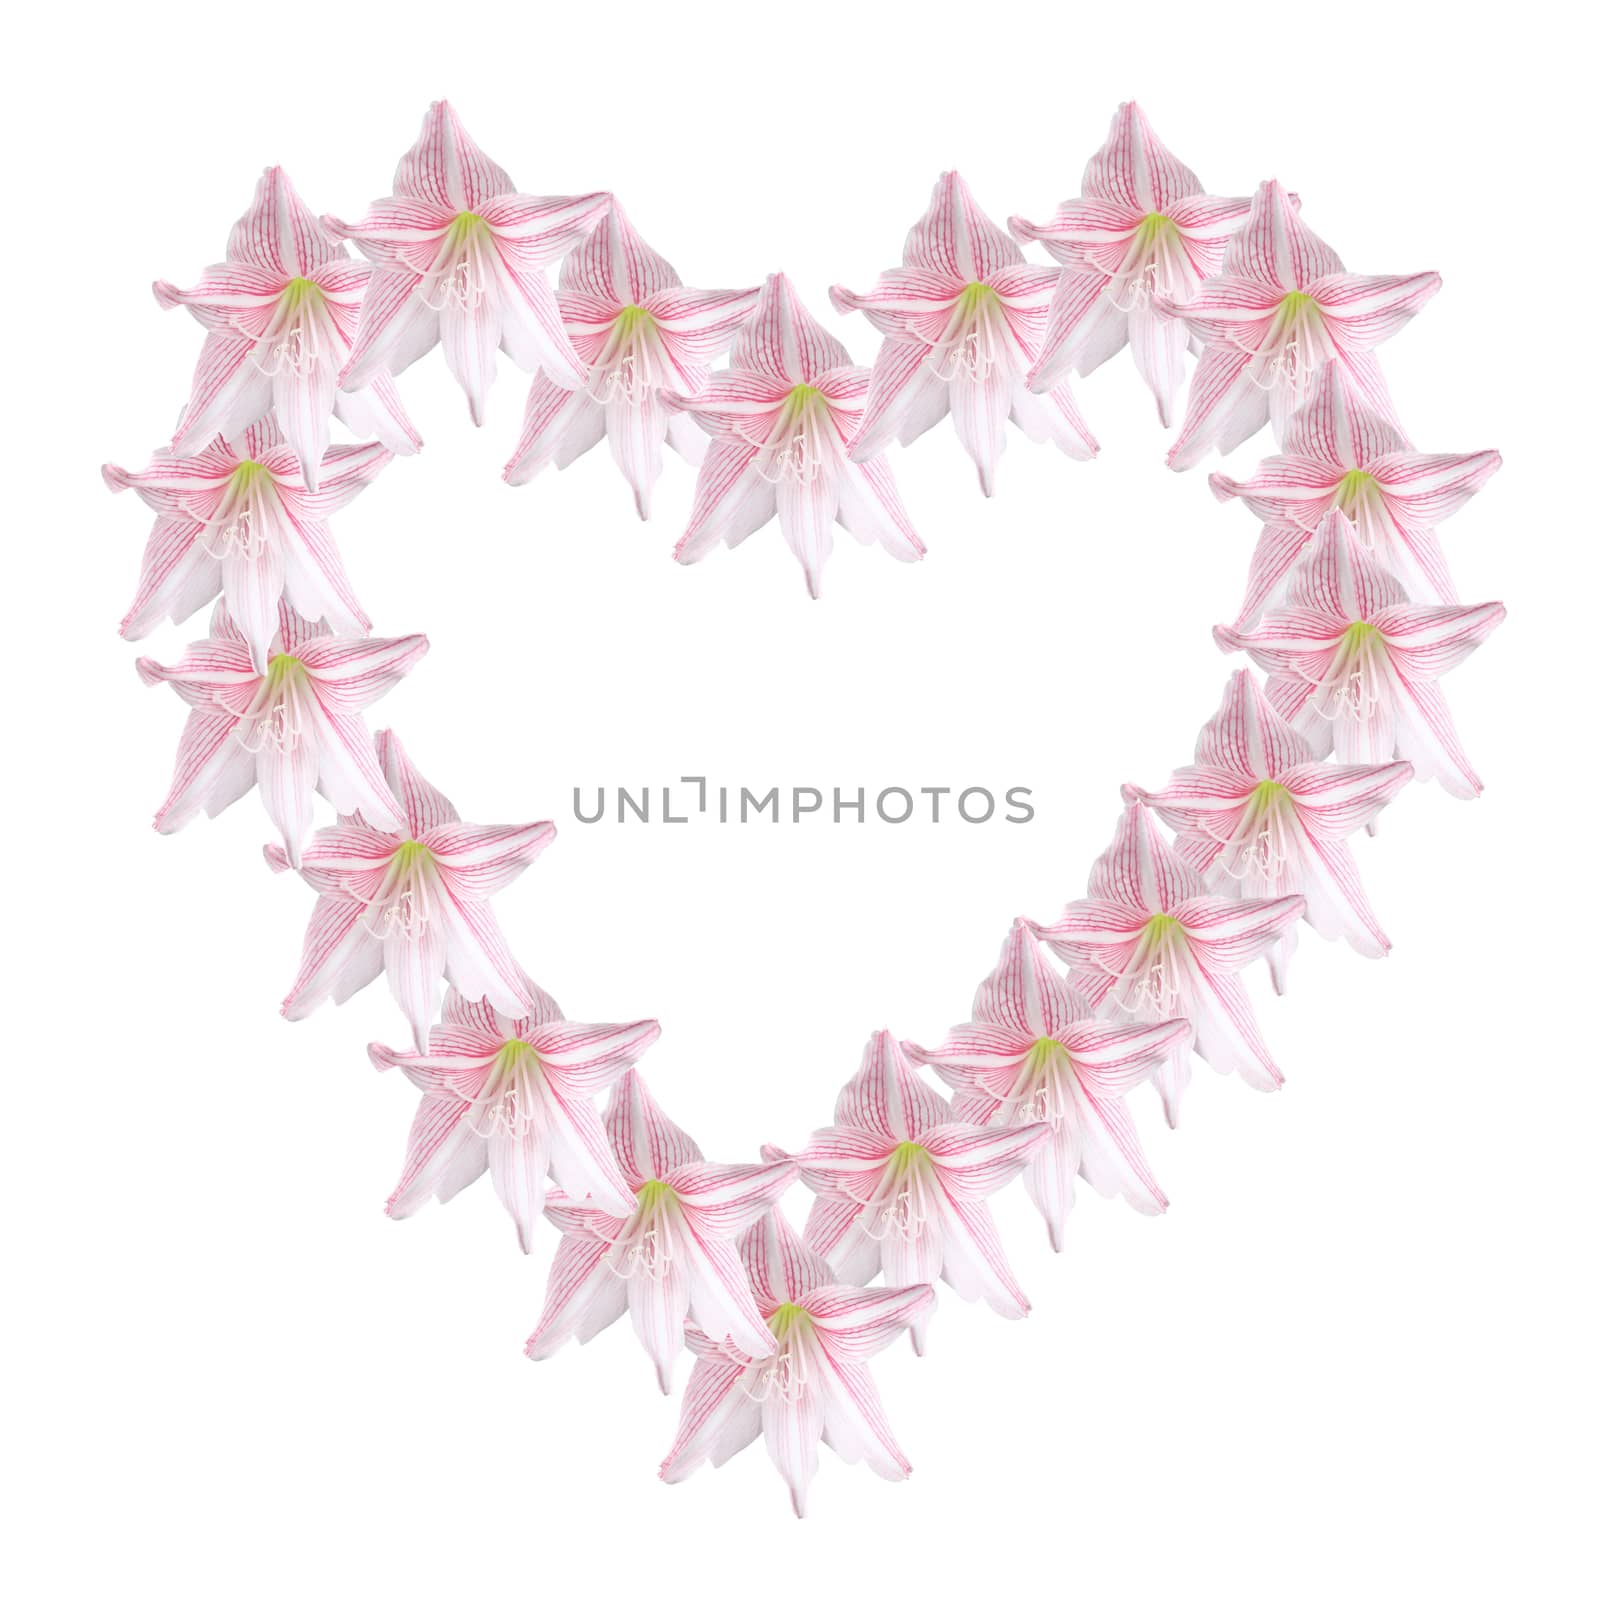 pink amaryllis forming a heart shape ring against white background